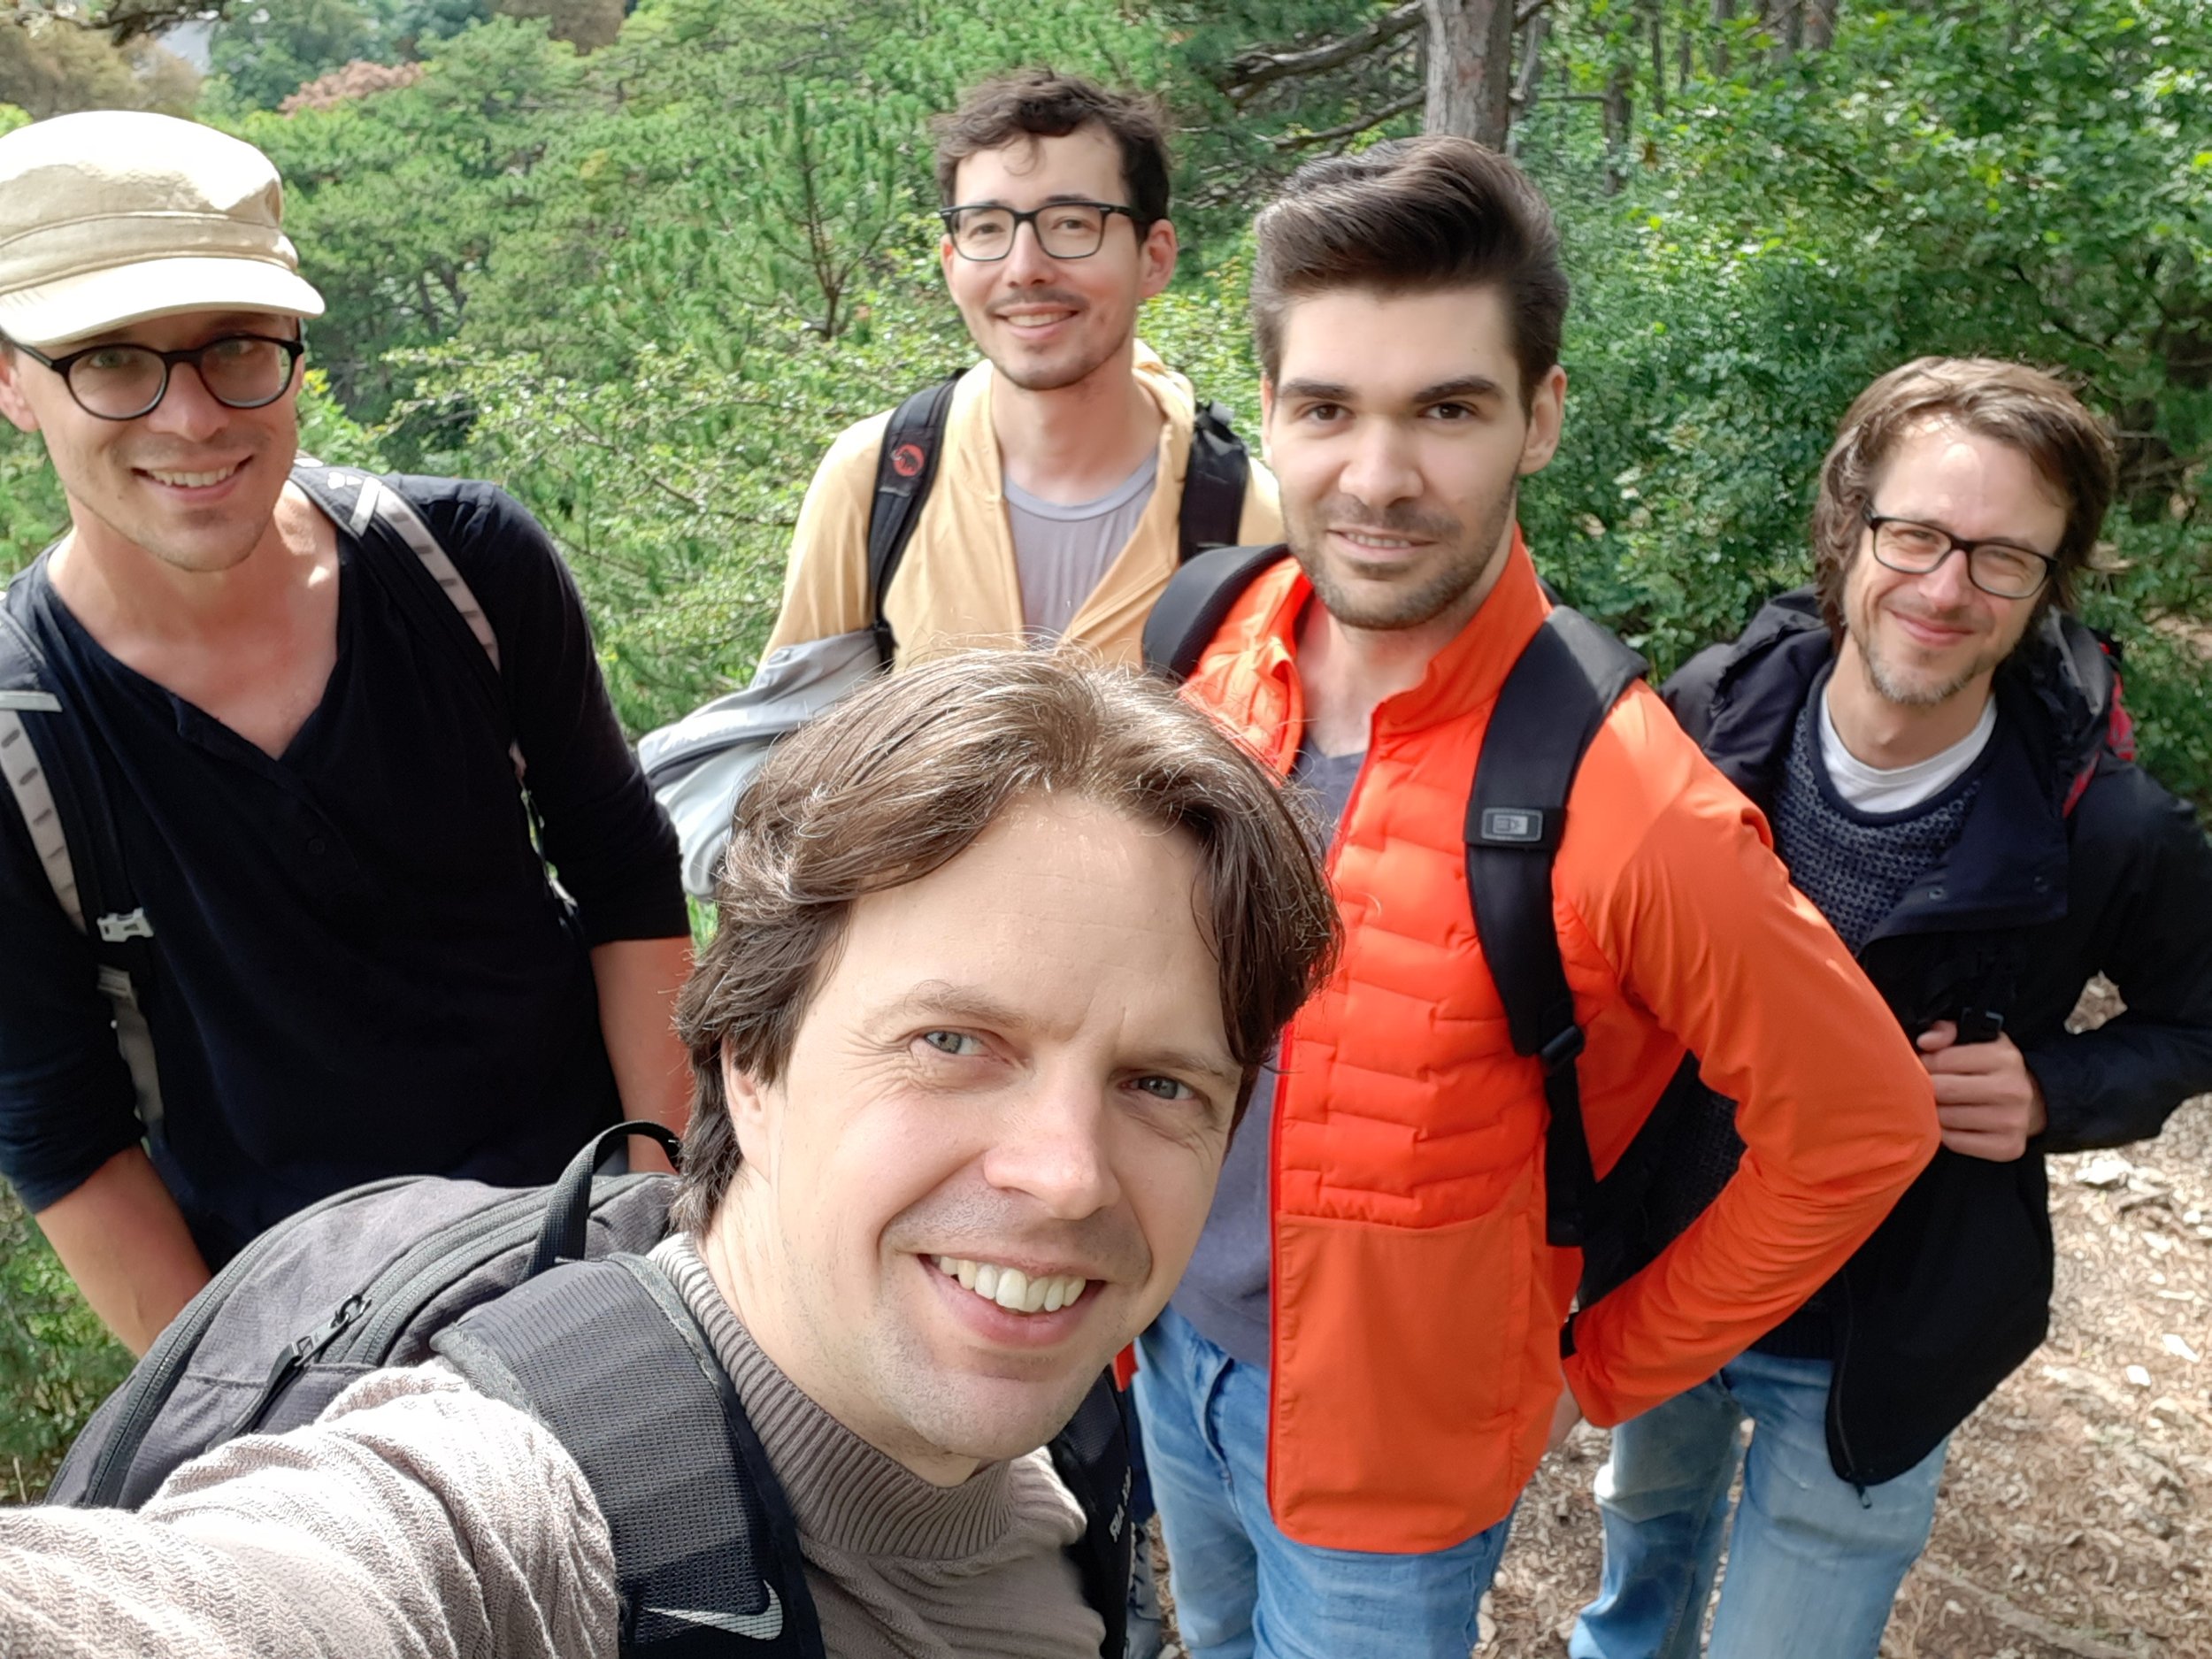 A group of Trustbit employees - Alex, Vadim, Rinat, Oscar and Daniel W - outdoors in a forest, taking a selfie during a company hike